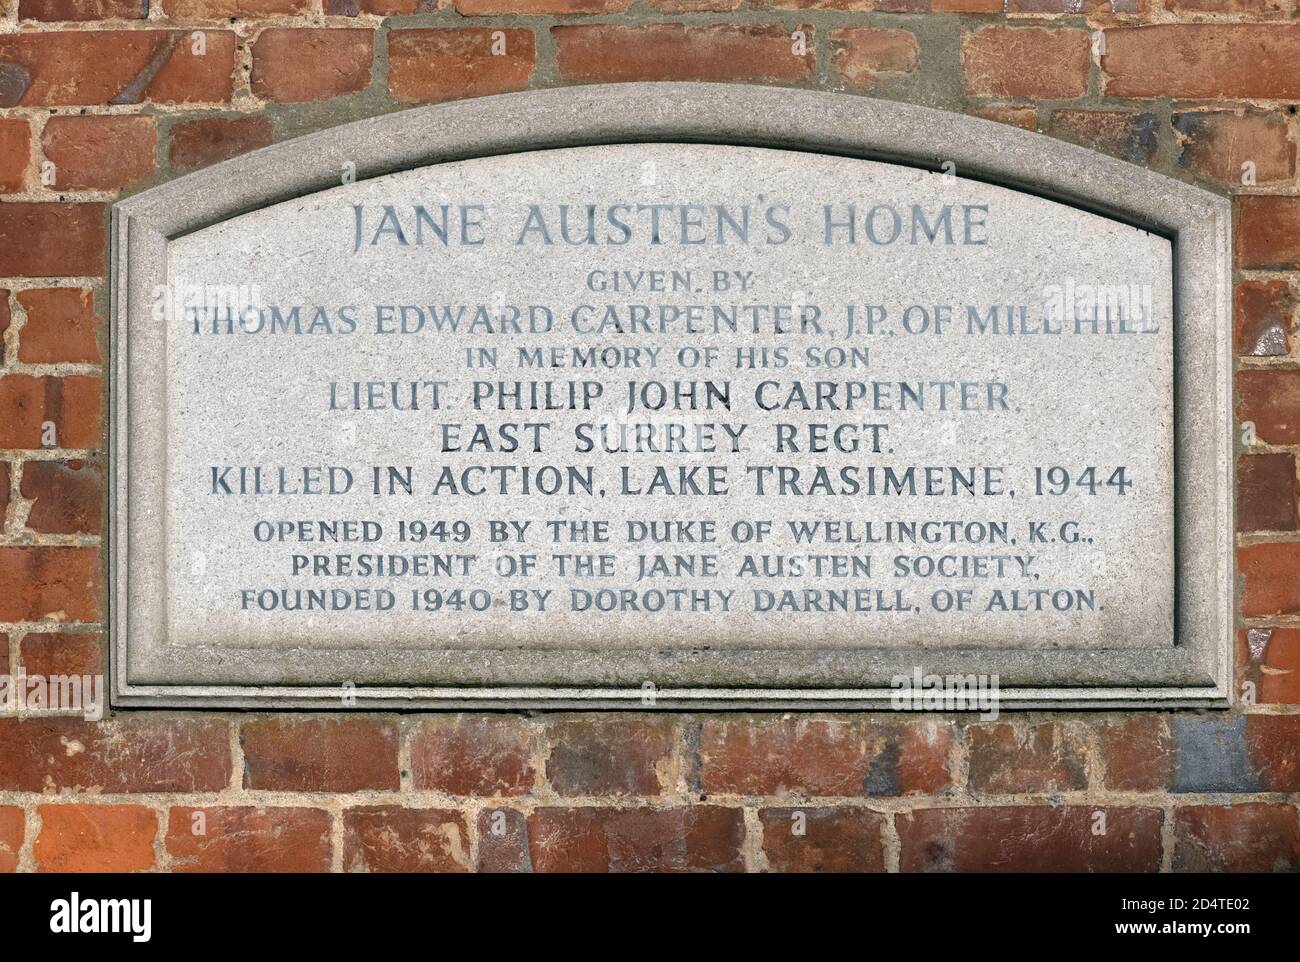 Plaque on the side of Jane Austen's Home at Chawton in memory of Lieut Philip John Carpenter killed in action 1944, Chawton, Hampshire, England, UK Stock Photo